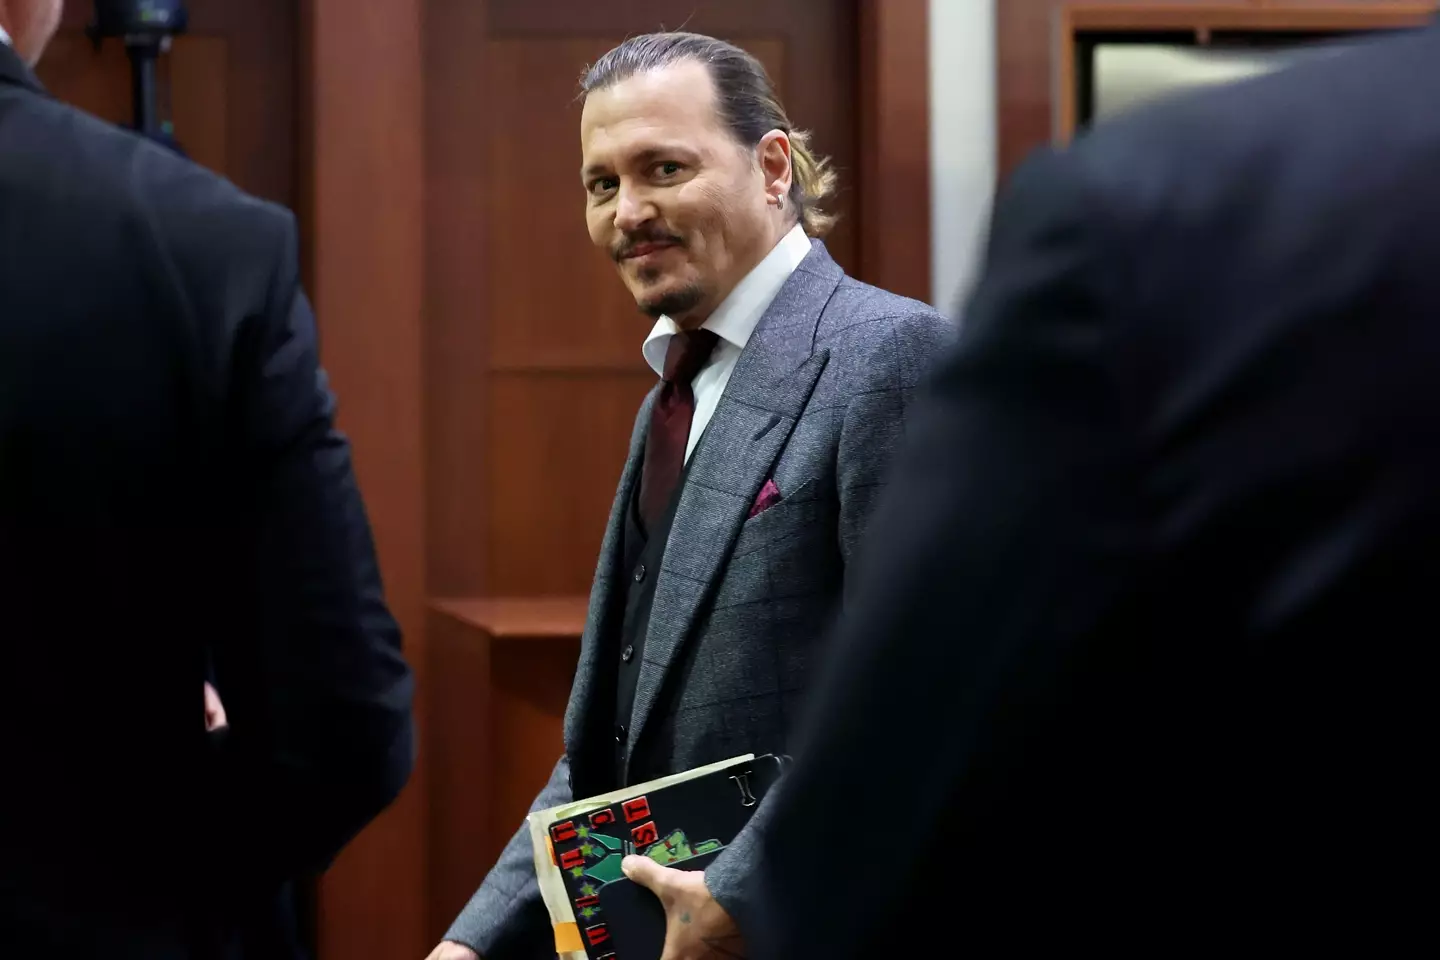 Actor Johnny Depp attends his defamation trial against his ex-wife Amber Heard, at the Fairfax County Circuit Courthouse in Fairfax, Virginia, U.S., April 28, 2022.